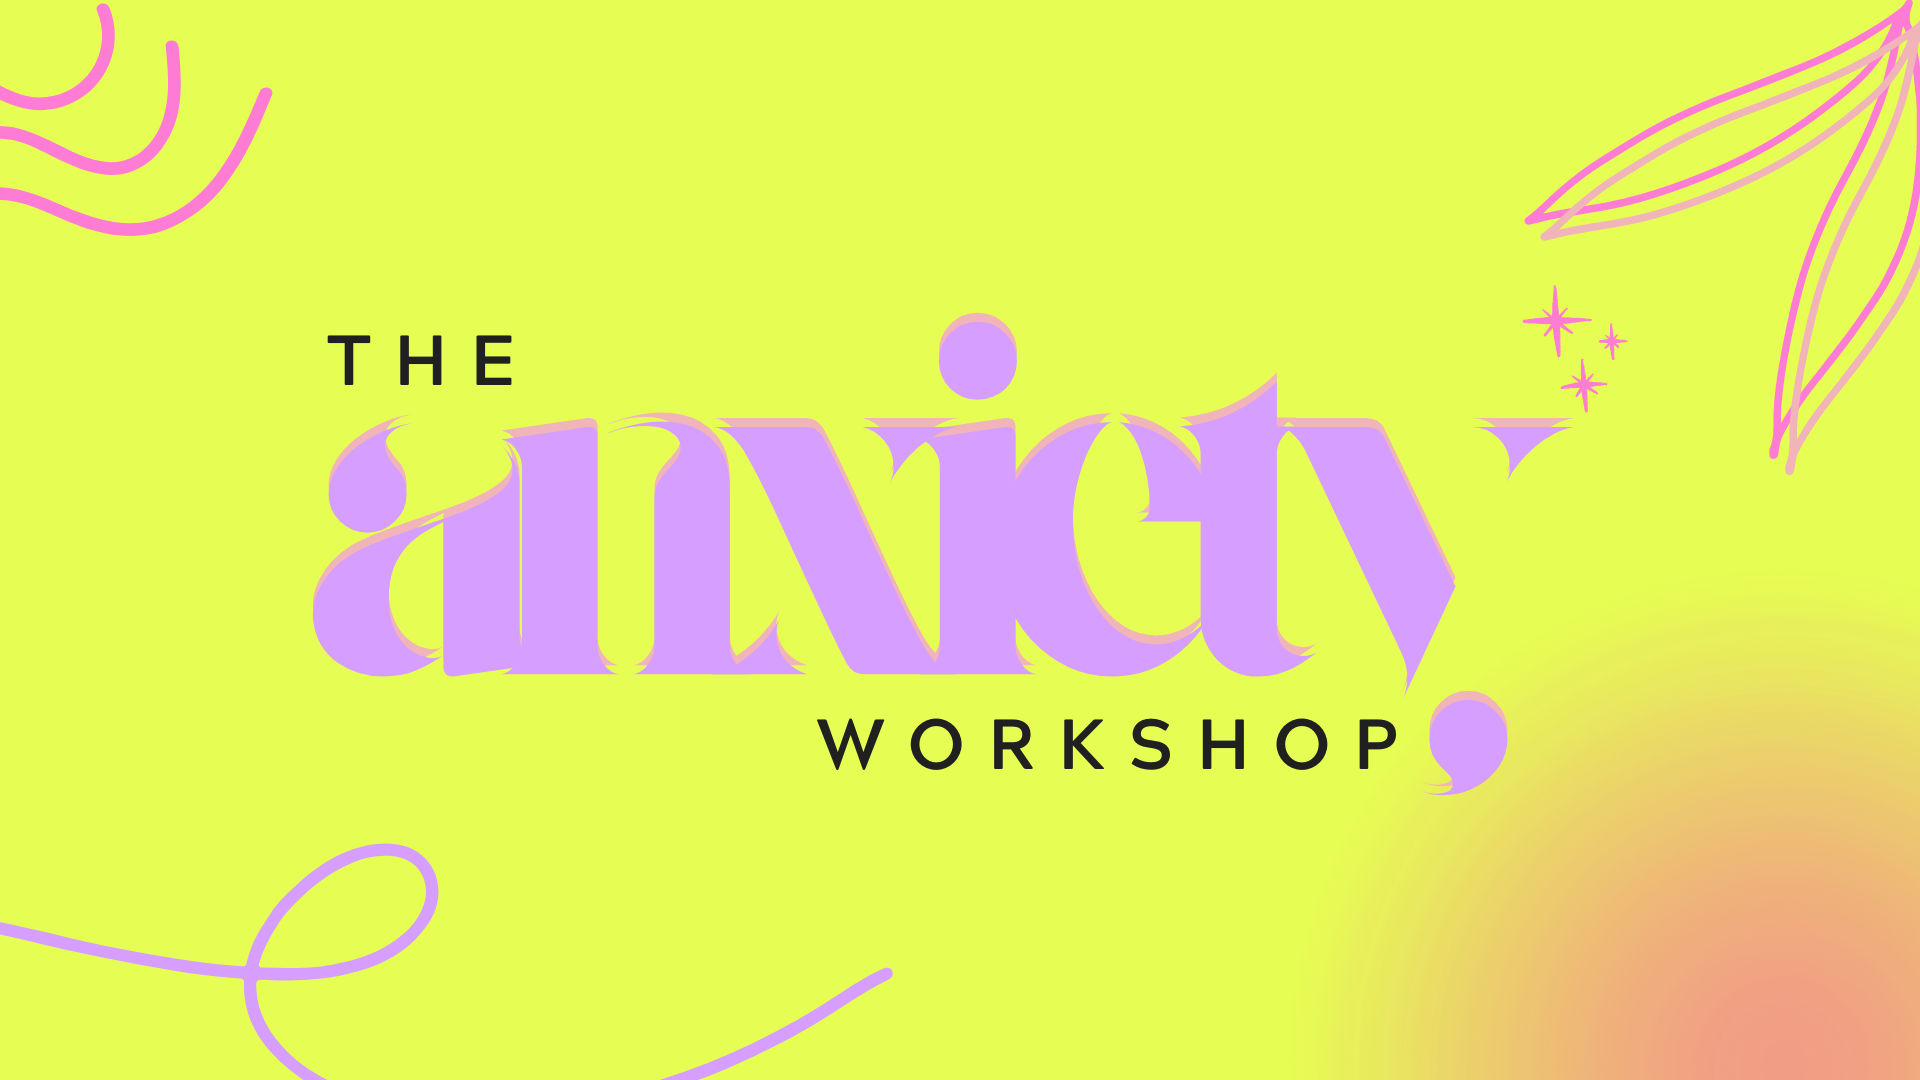 The Anxiety Workshop event cover photo